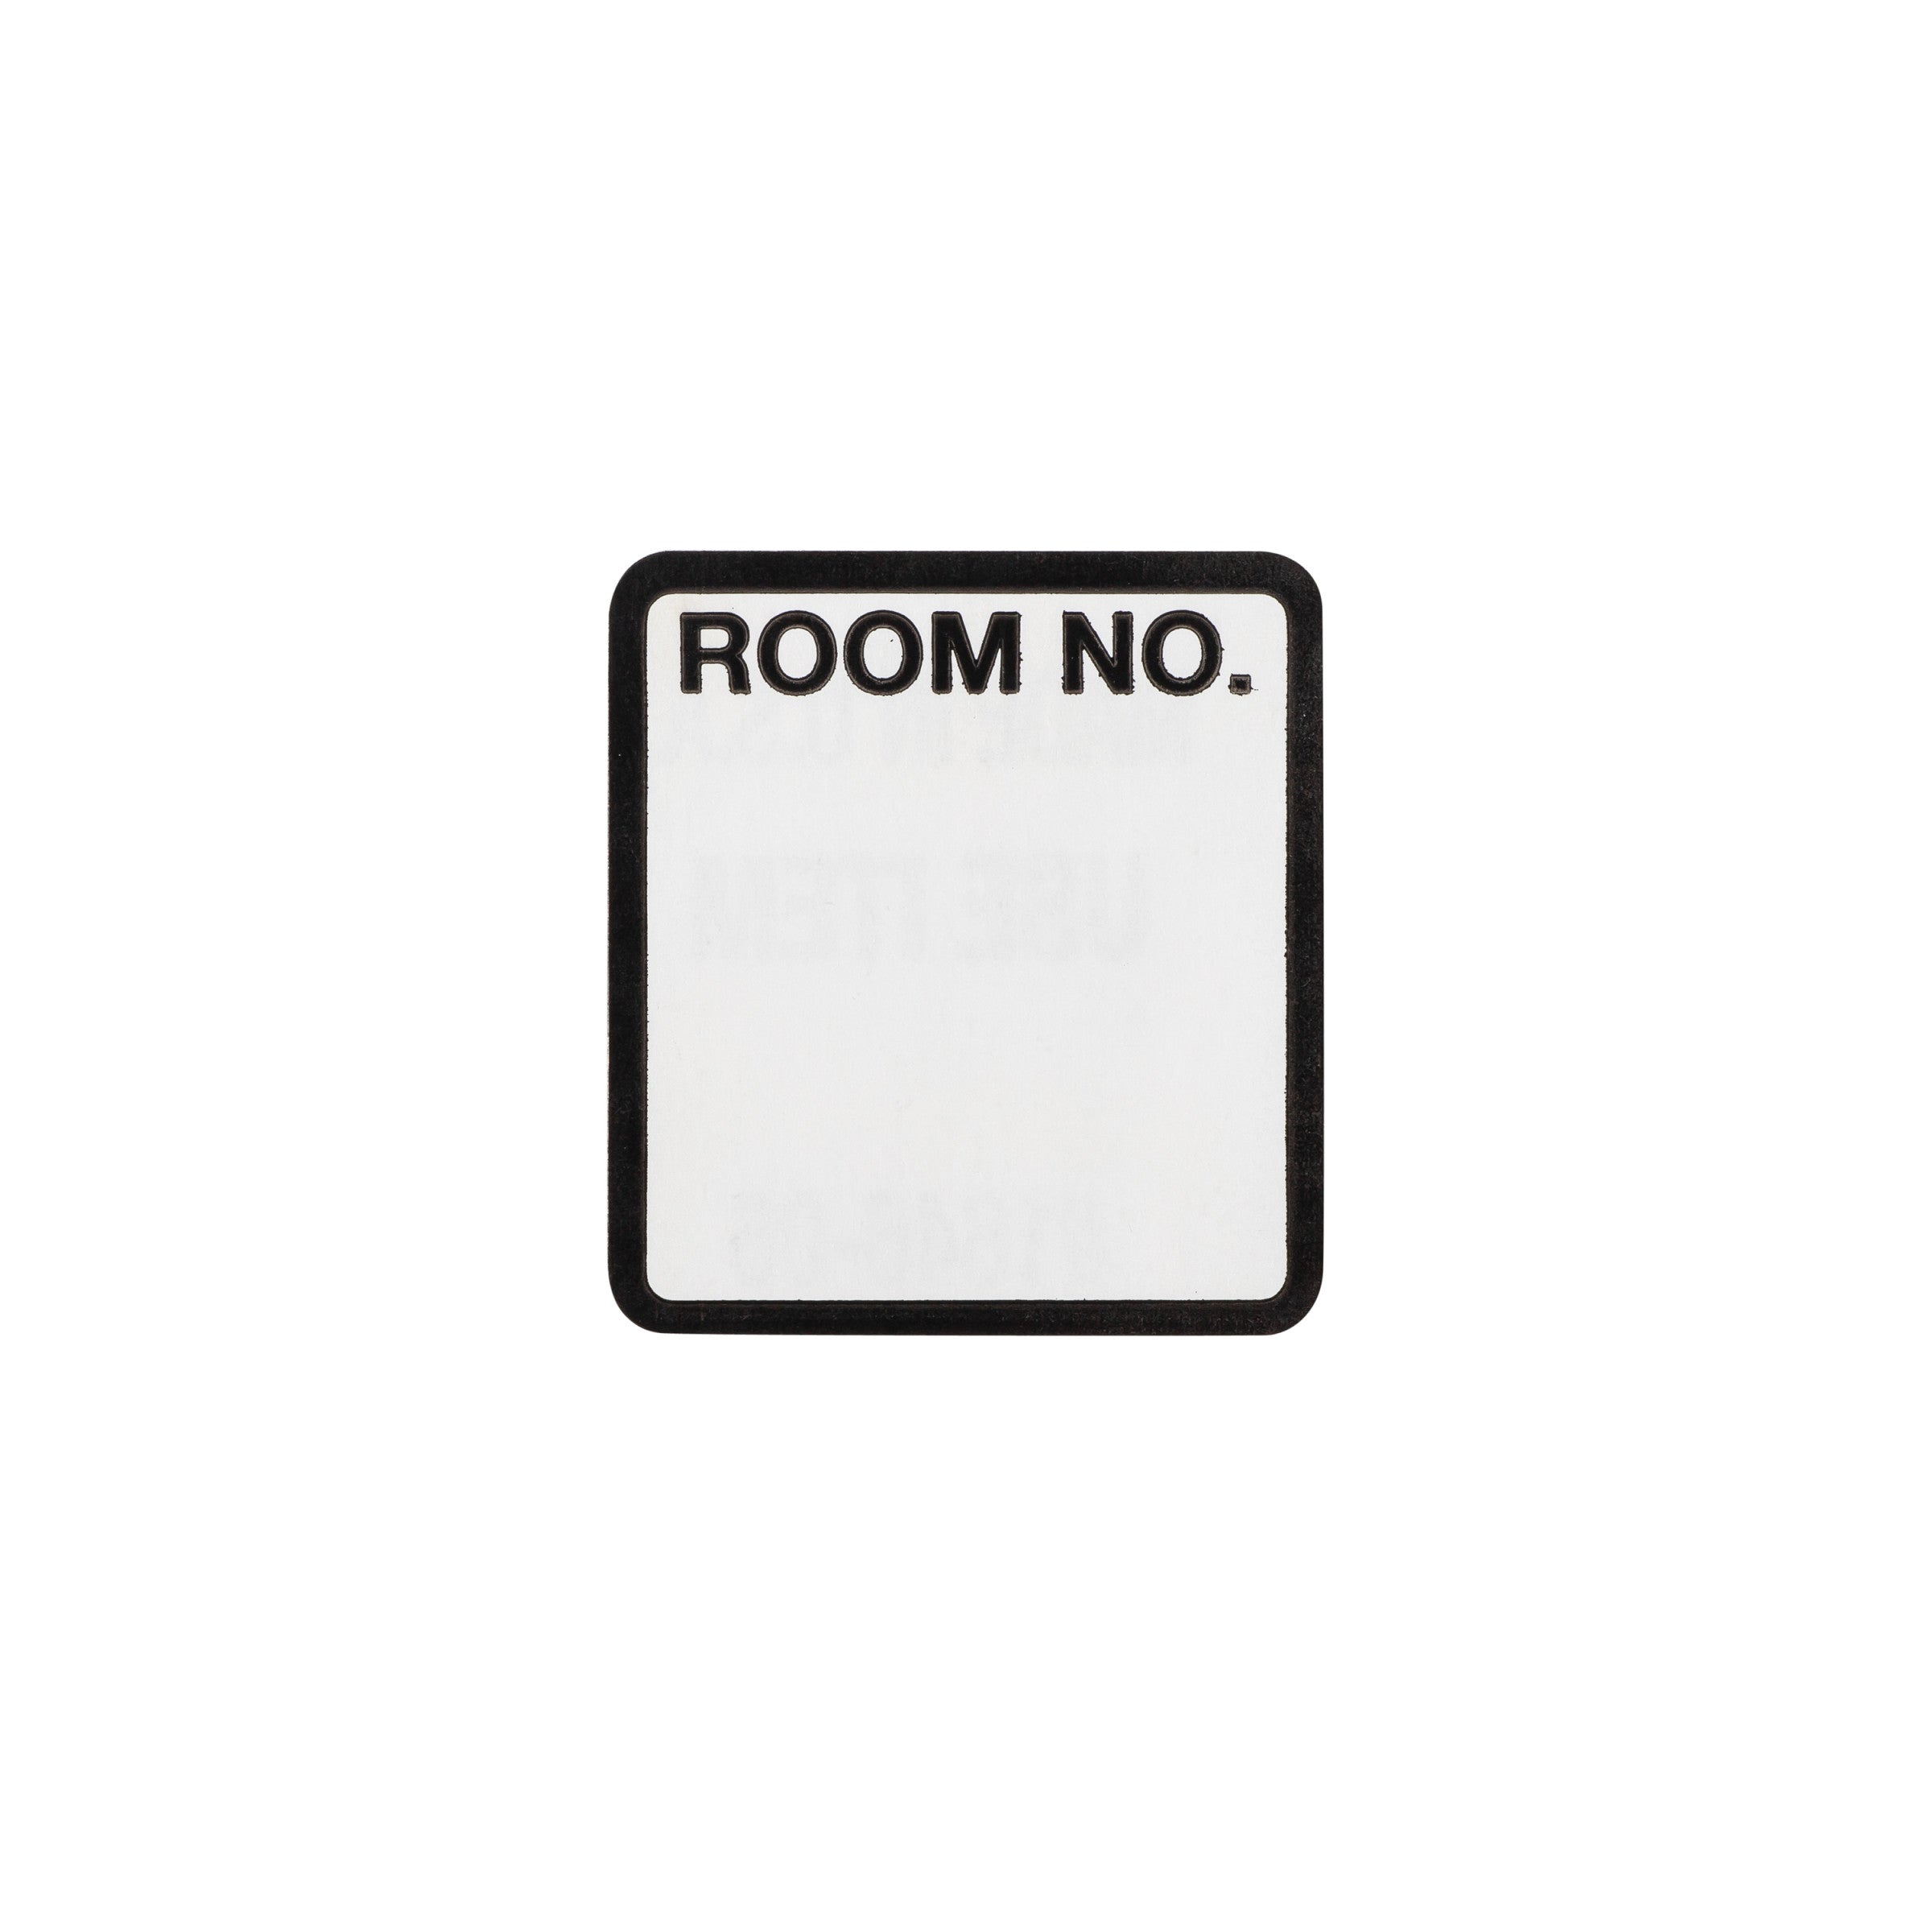 Room Number Alert and Instruction Labels, White, W1.5" x H1.375" (Roll of 200)